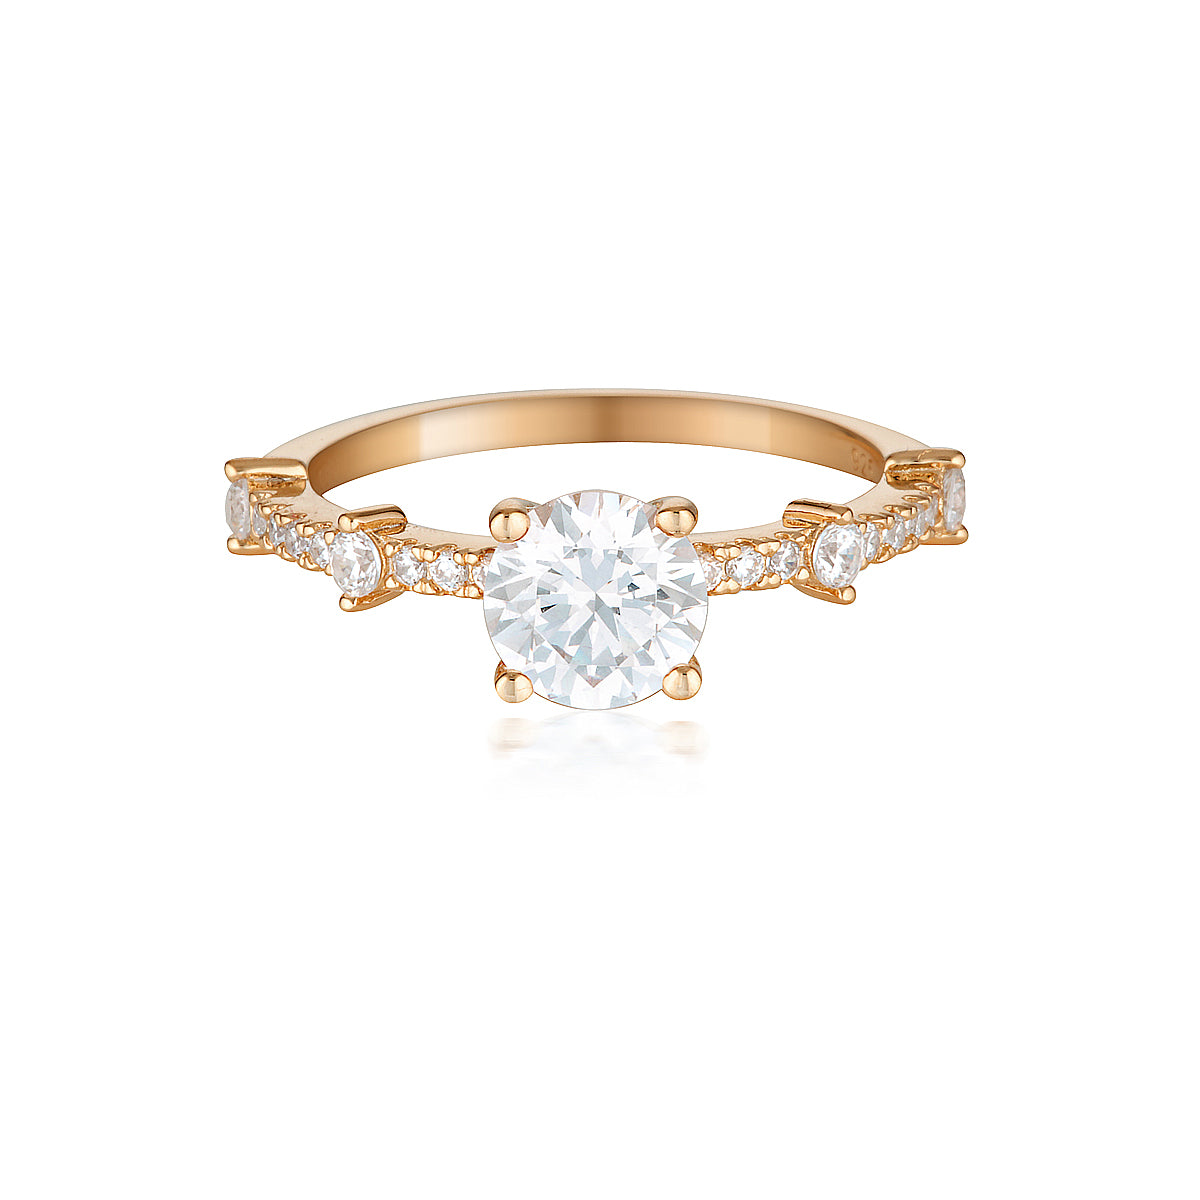 RED CARPET GALA SOLITAIRE RING ROSE GOLD